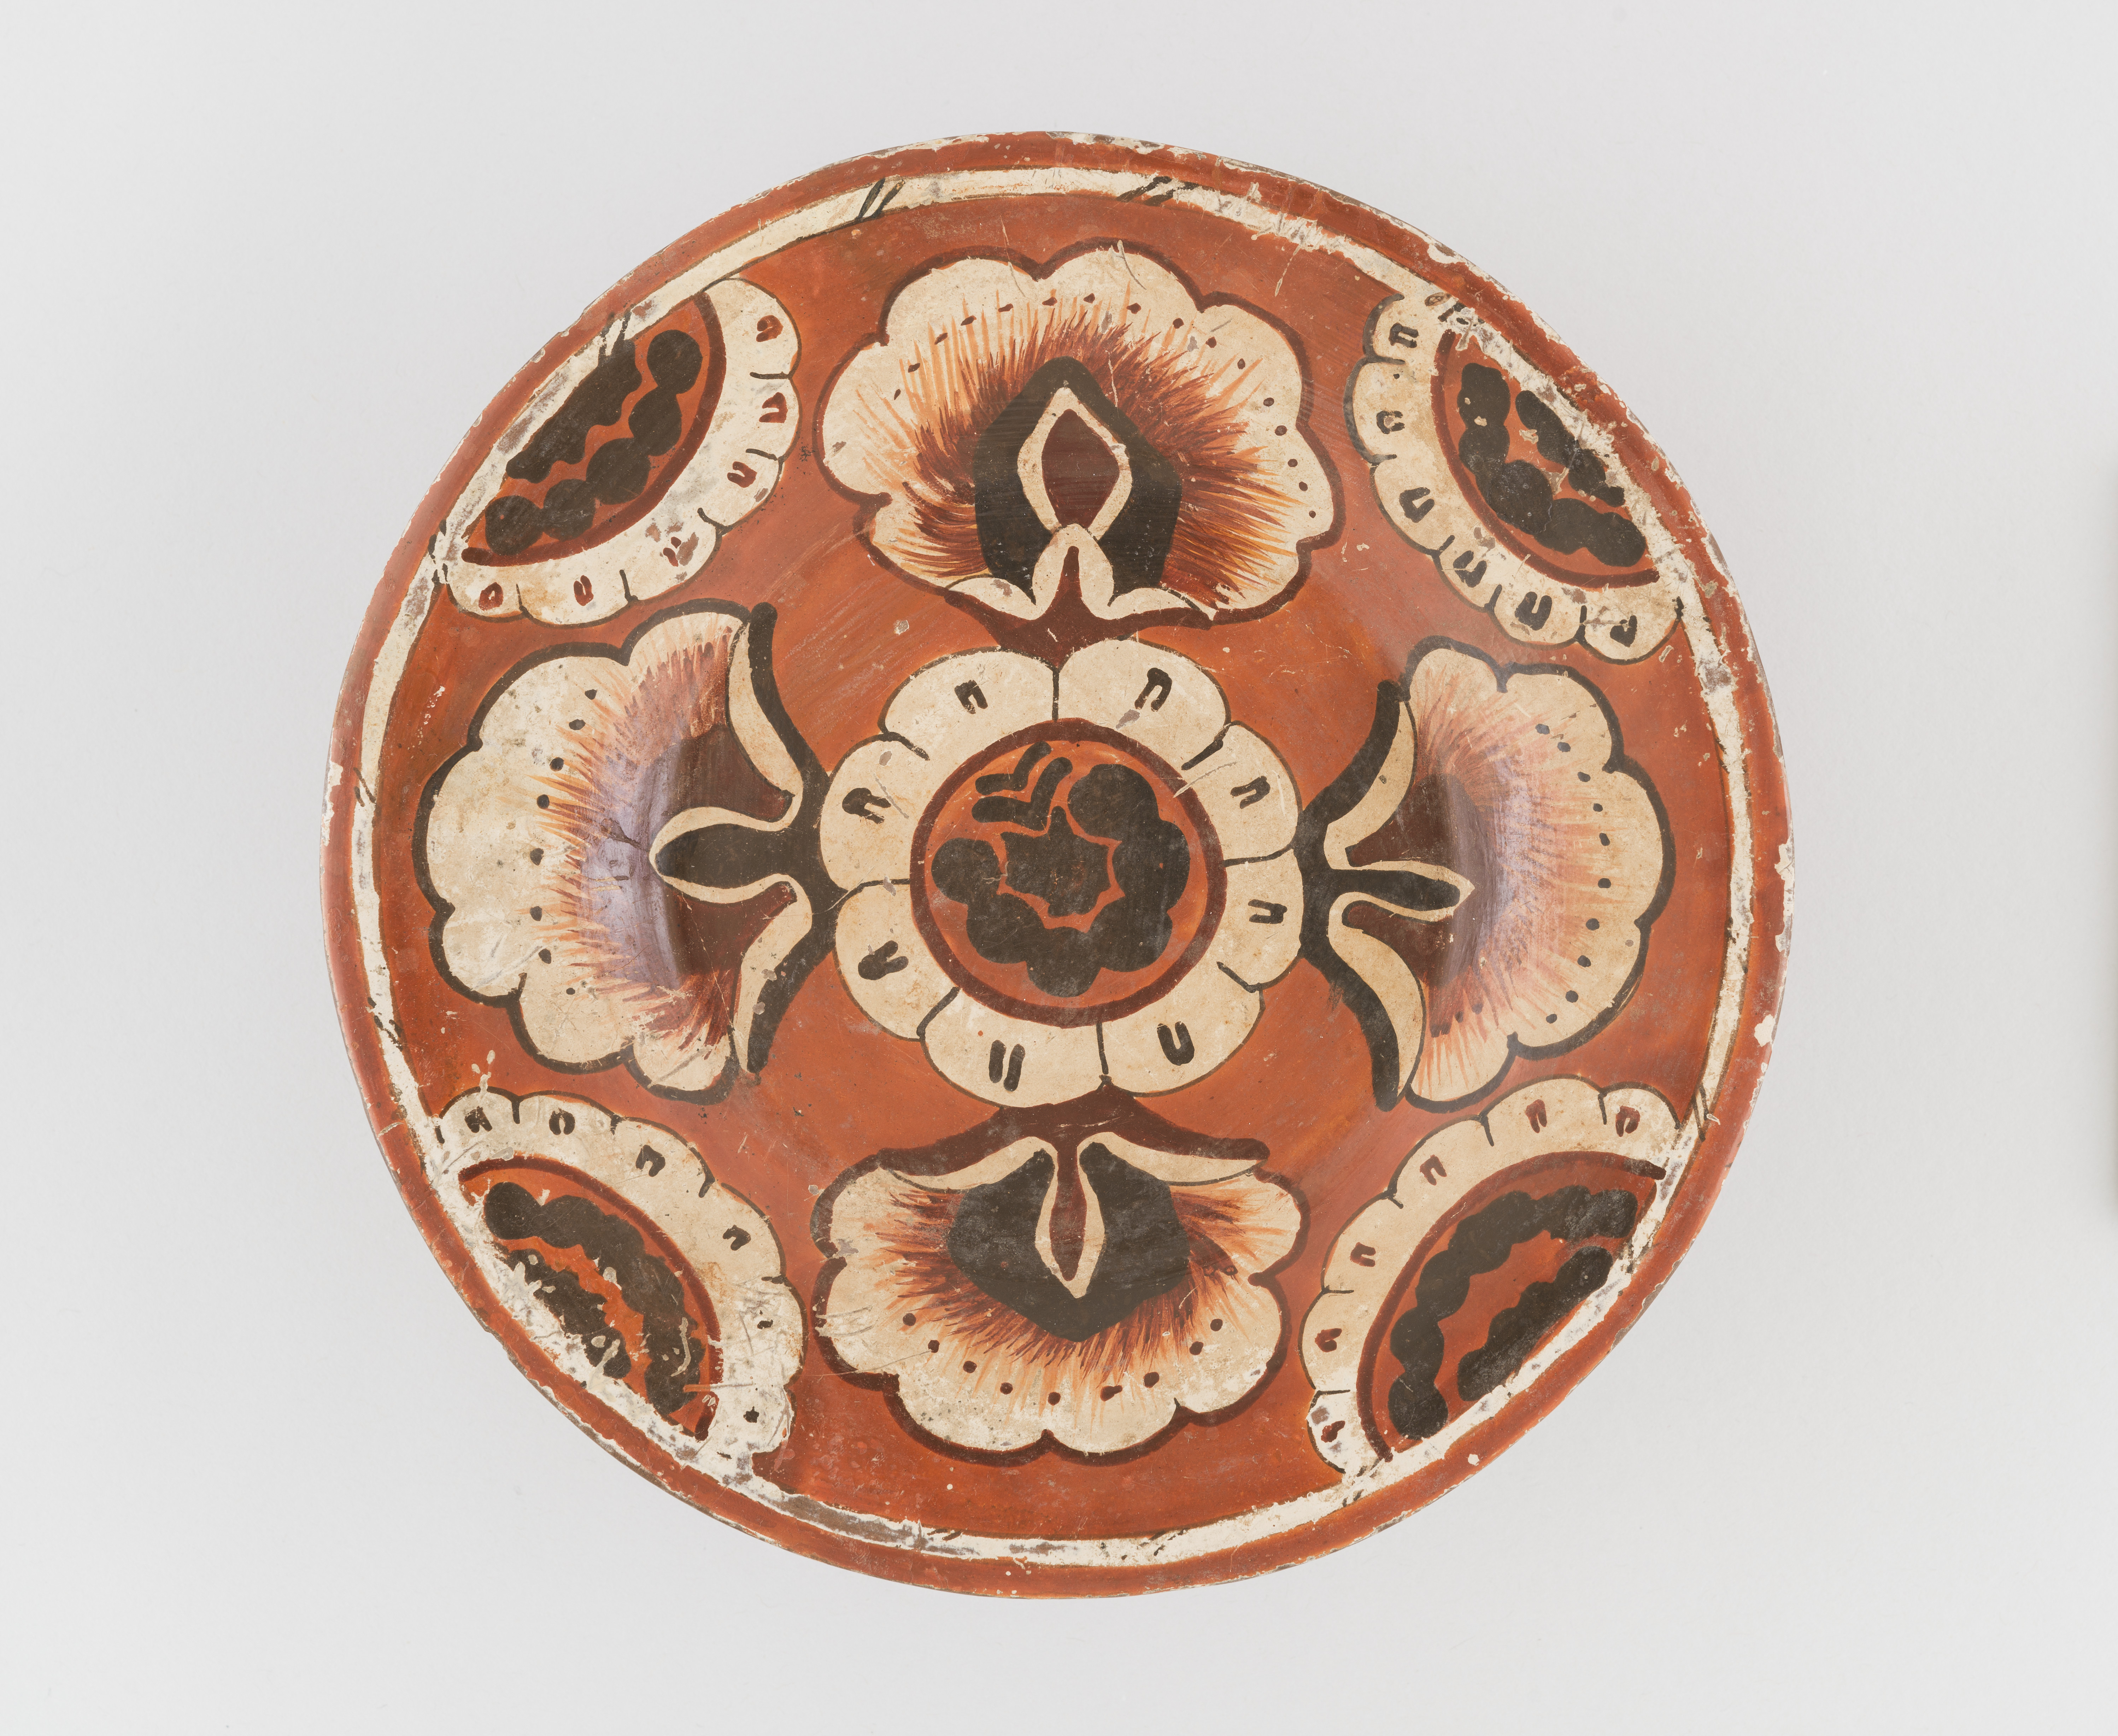 Plate with Floral Design, after 1519